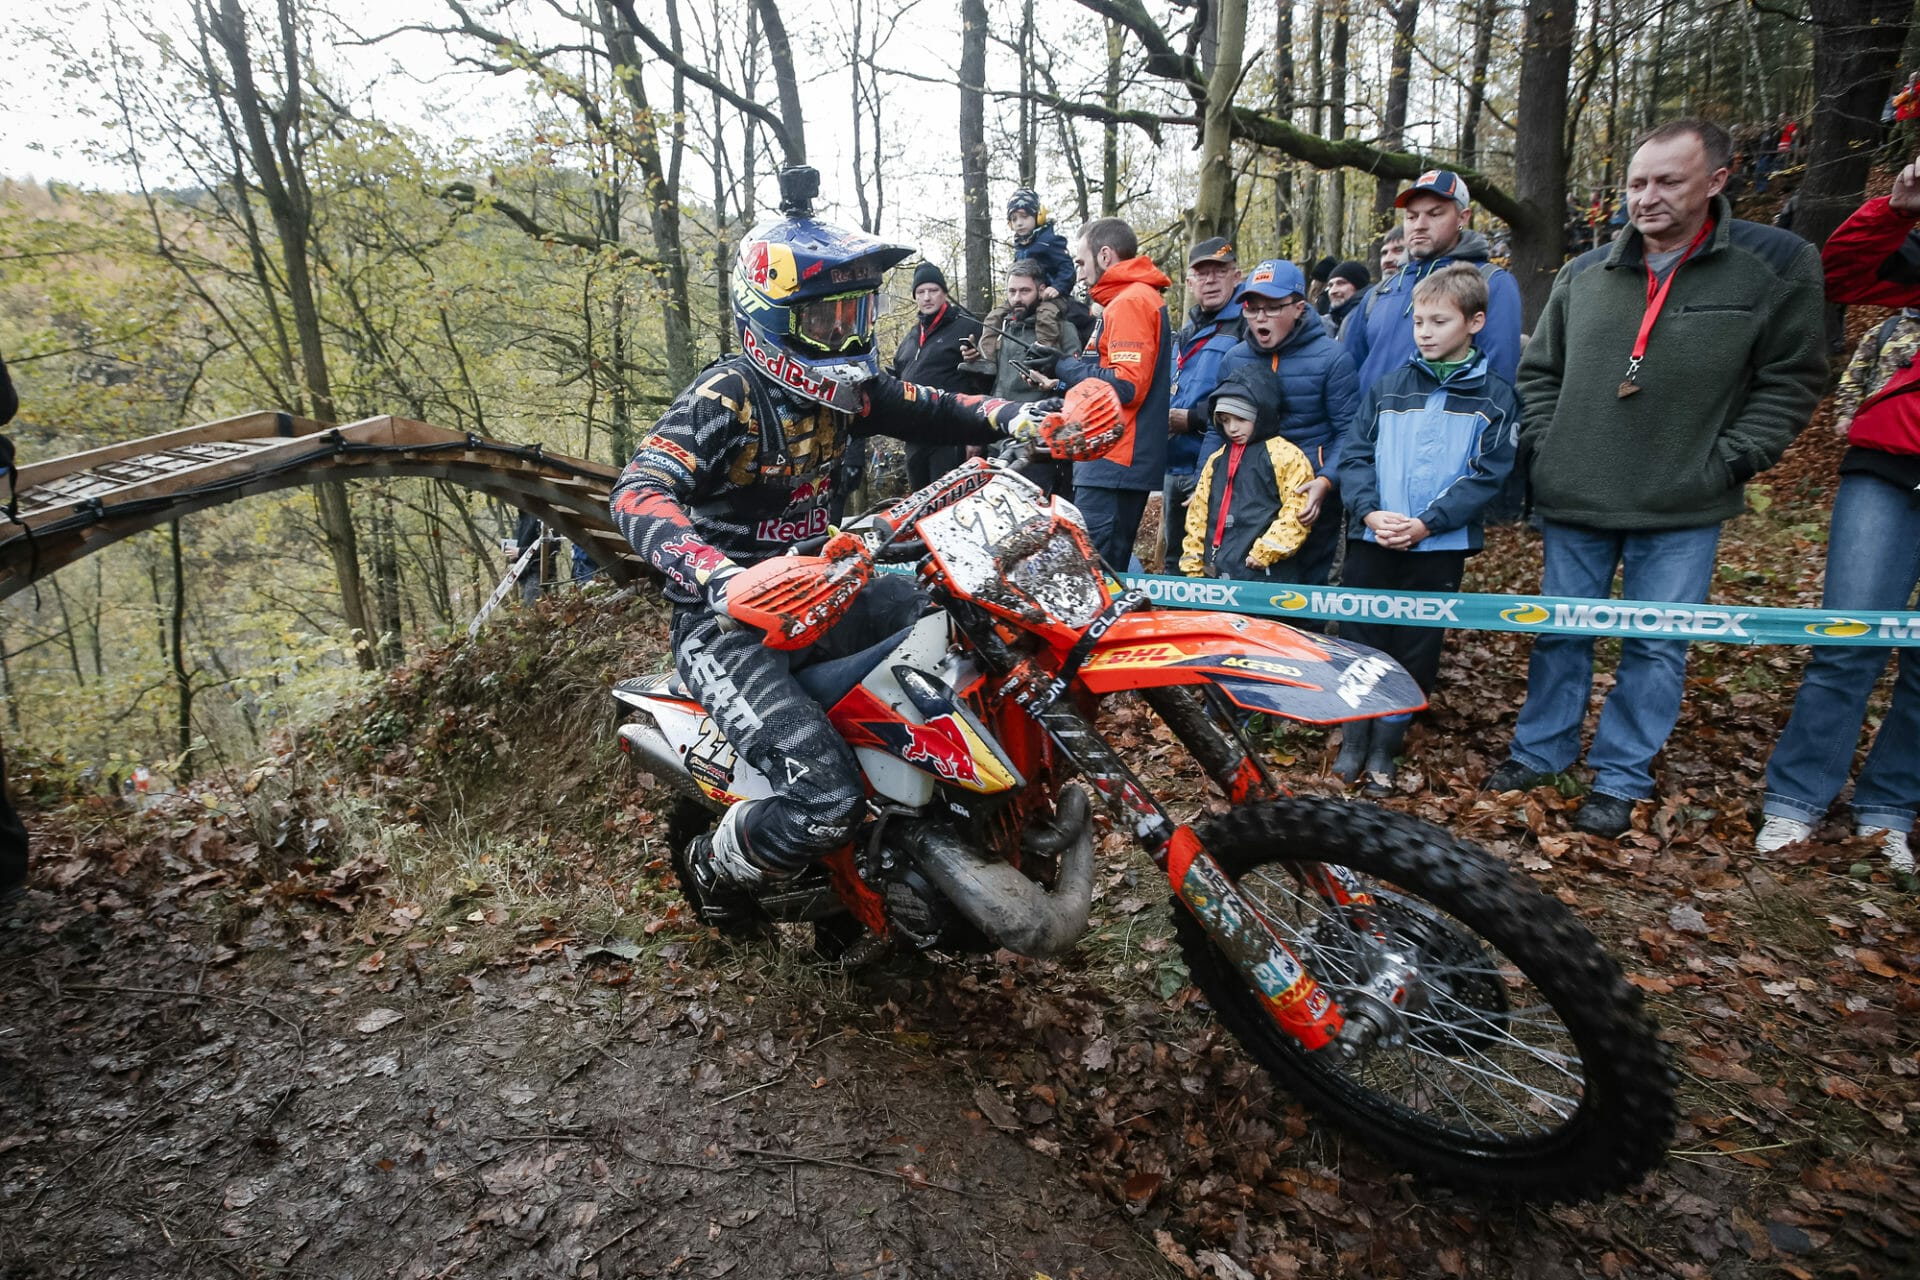 #WESS: Manuel #Lettenbichler is #Enduro World Champion
- also in the app Motorcycle News